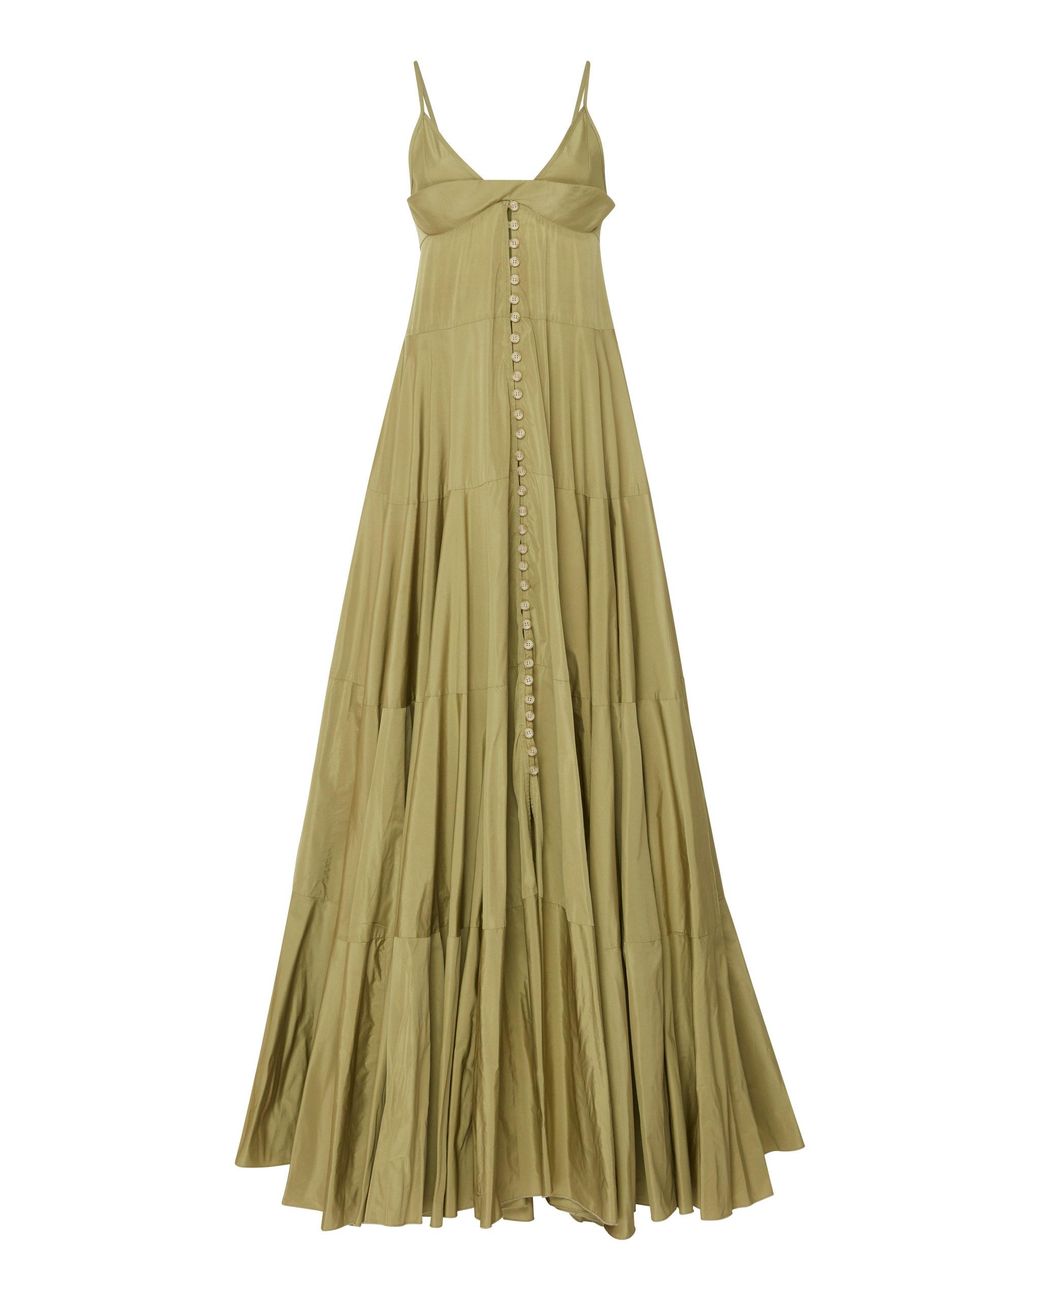 Jacquemus La Robe Manosque Tiered Twill Maxi Dress in Green | Lyst